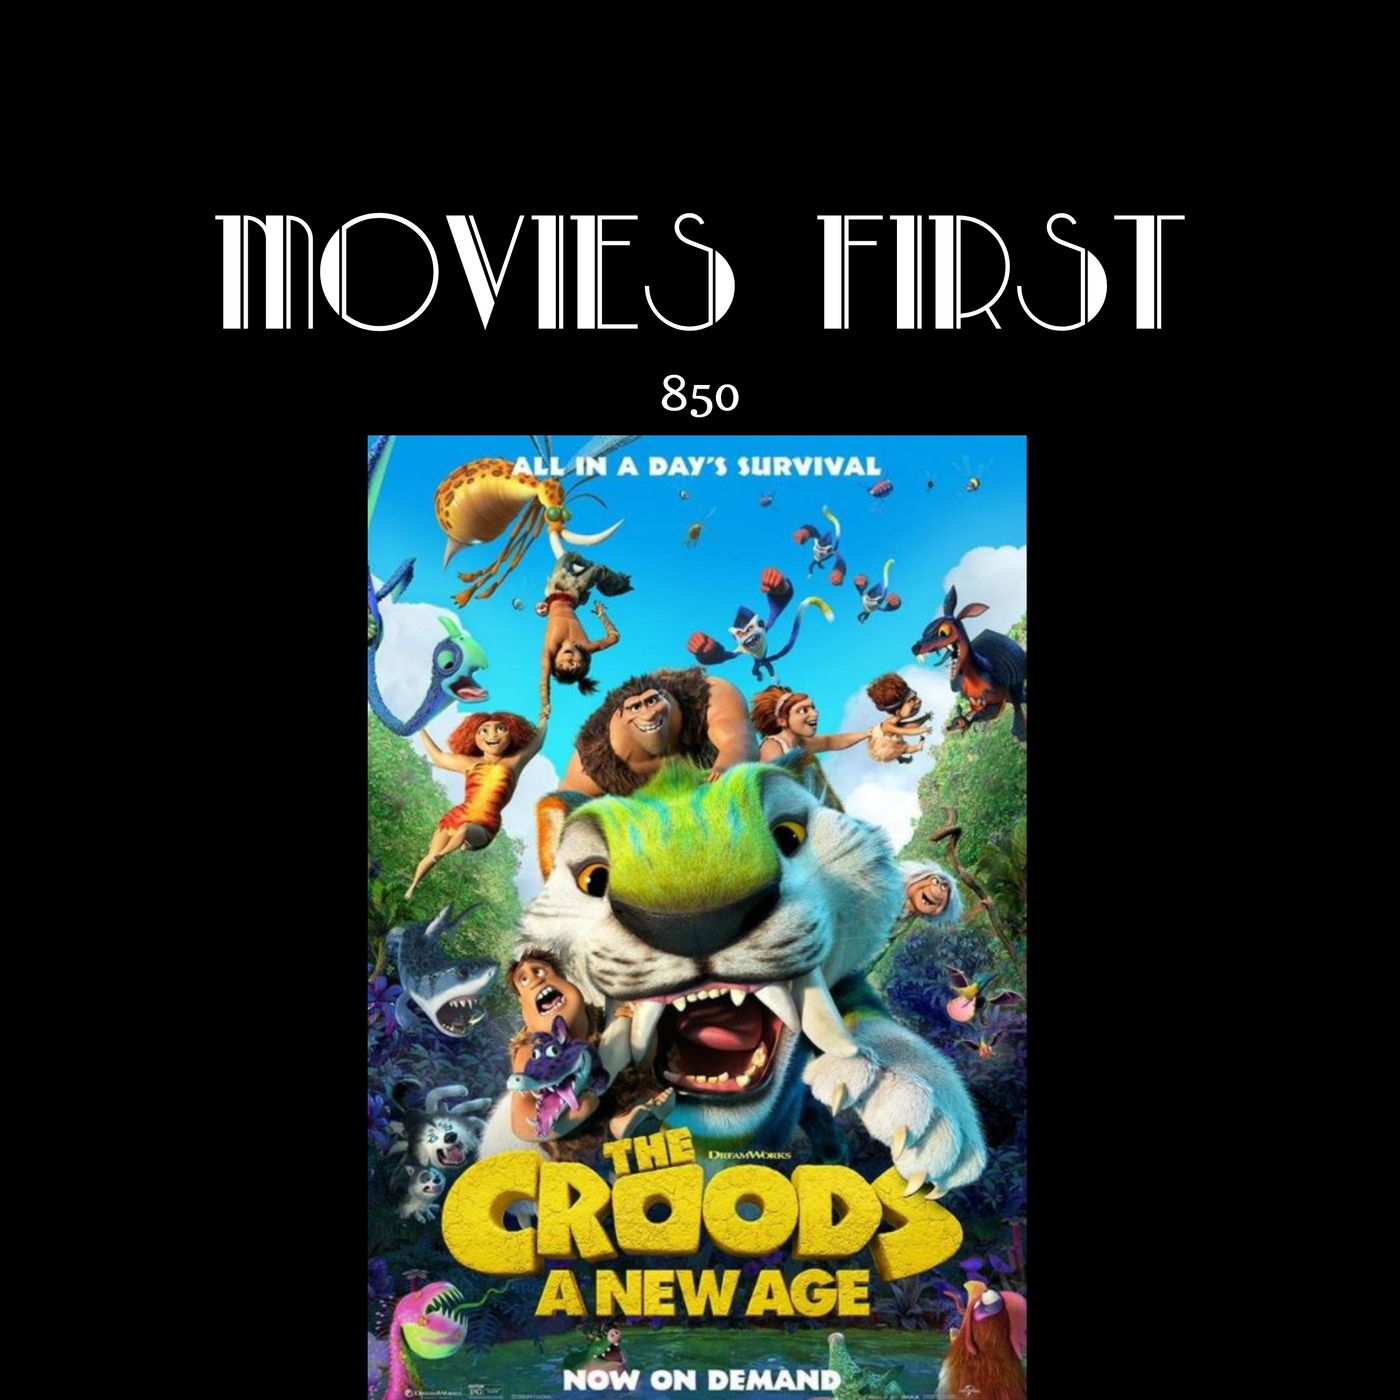 The Croods A New Age (the @MoviesFirst review) (Animation, Adventure, Comedy)